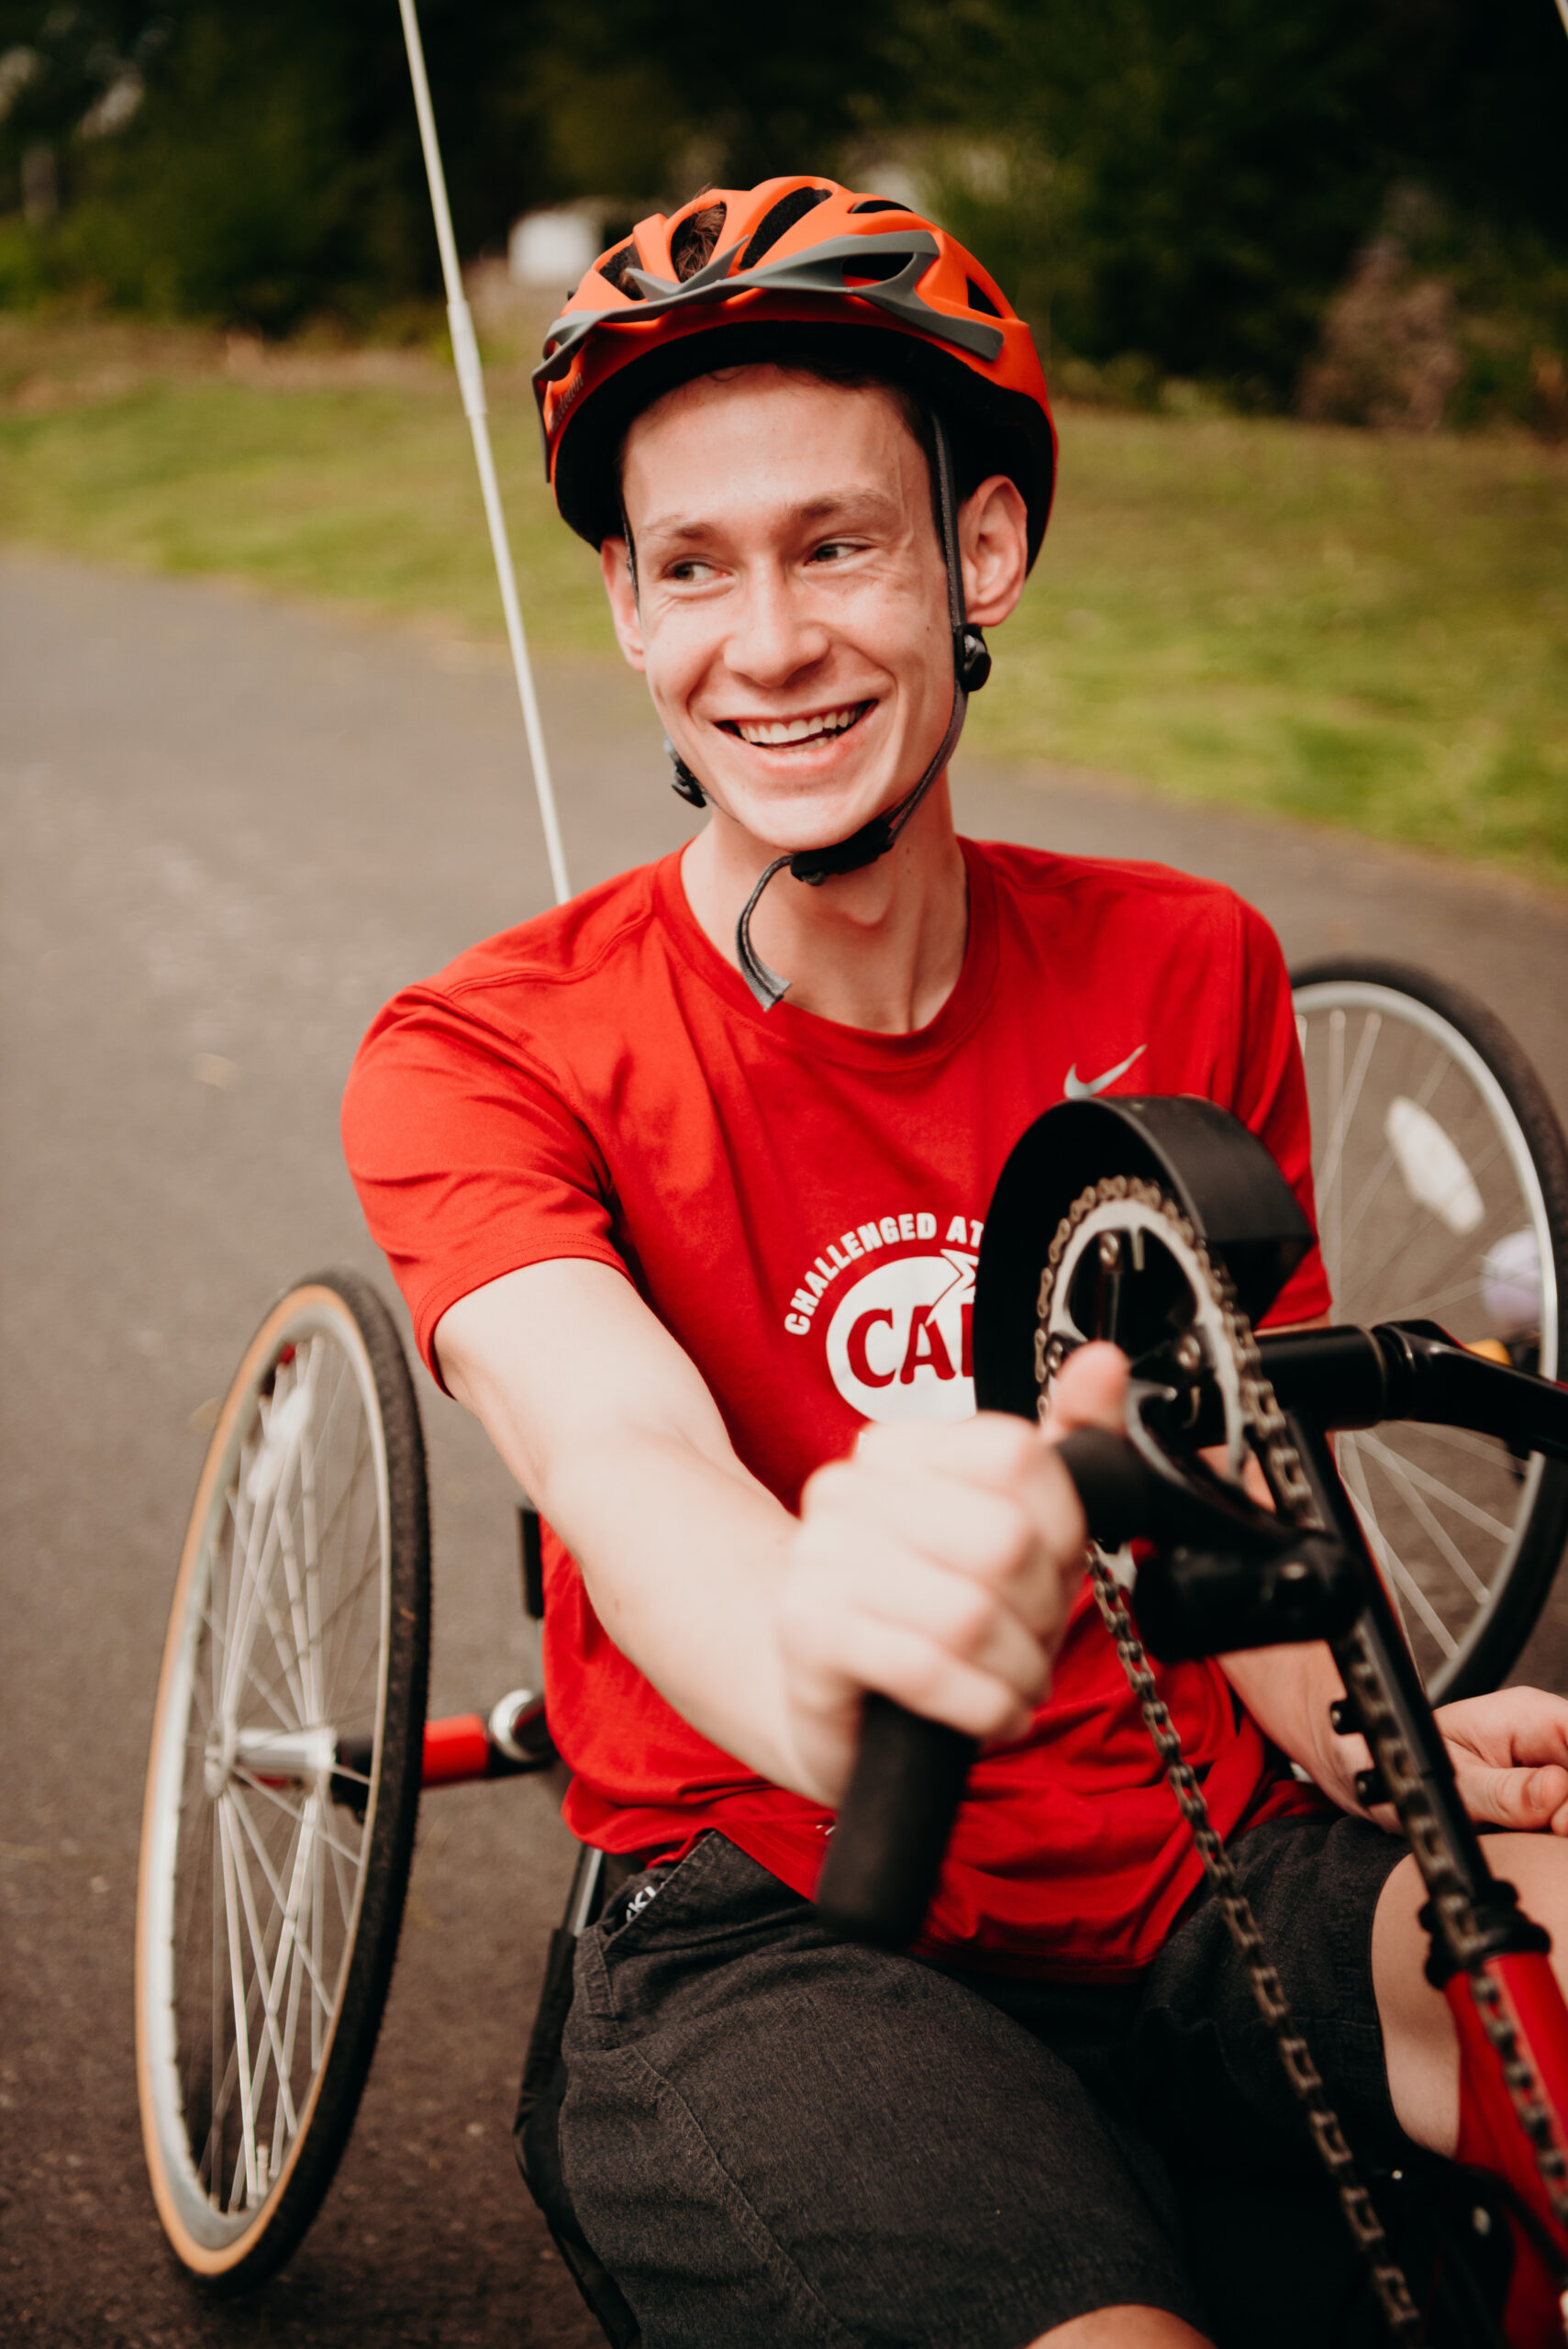 Hustle participant Camron Gabler on a handcycle bike in a red shirt smiling